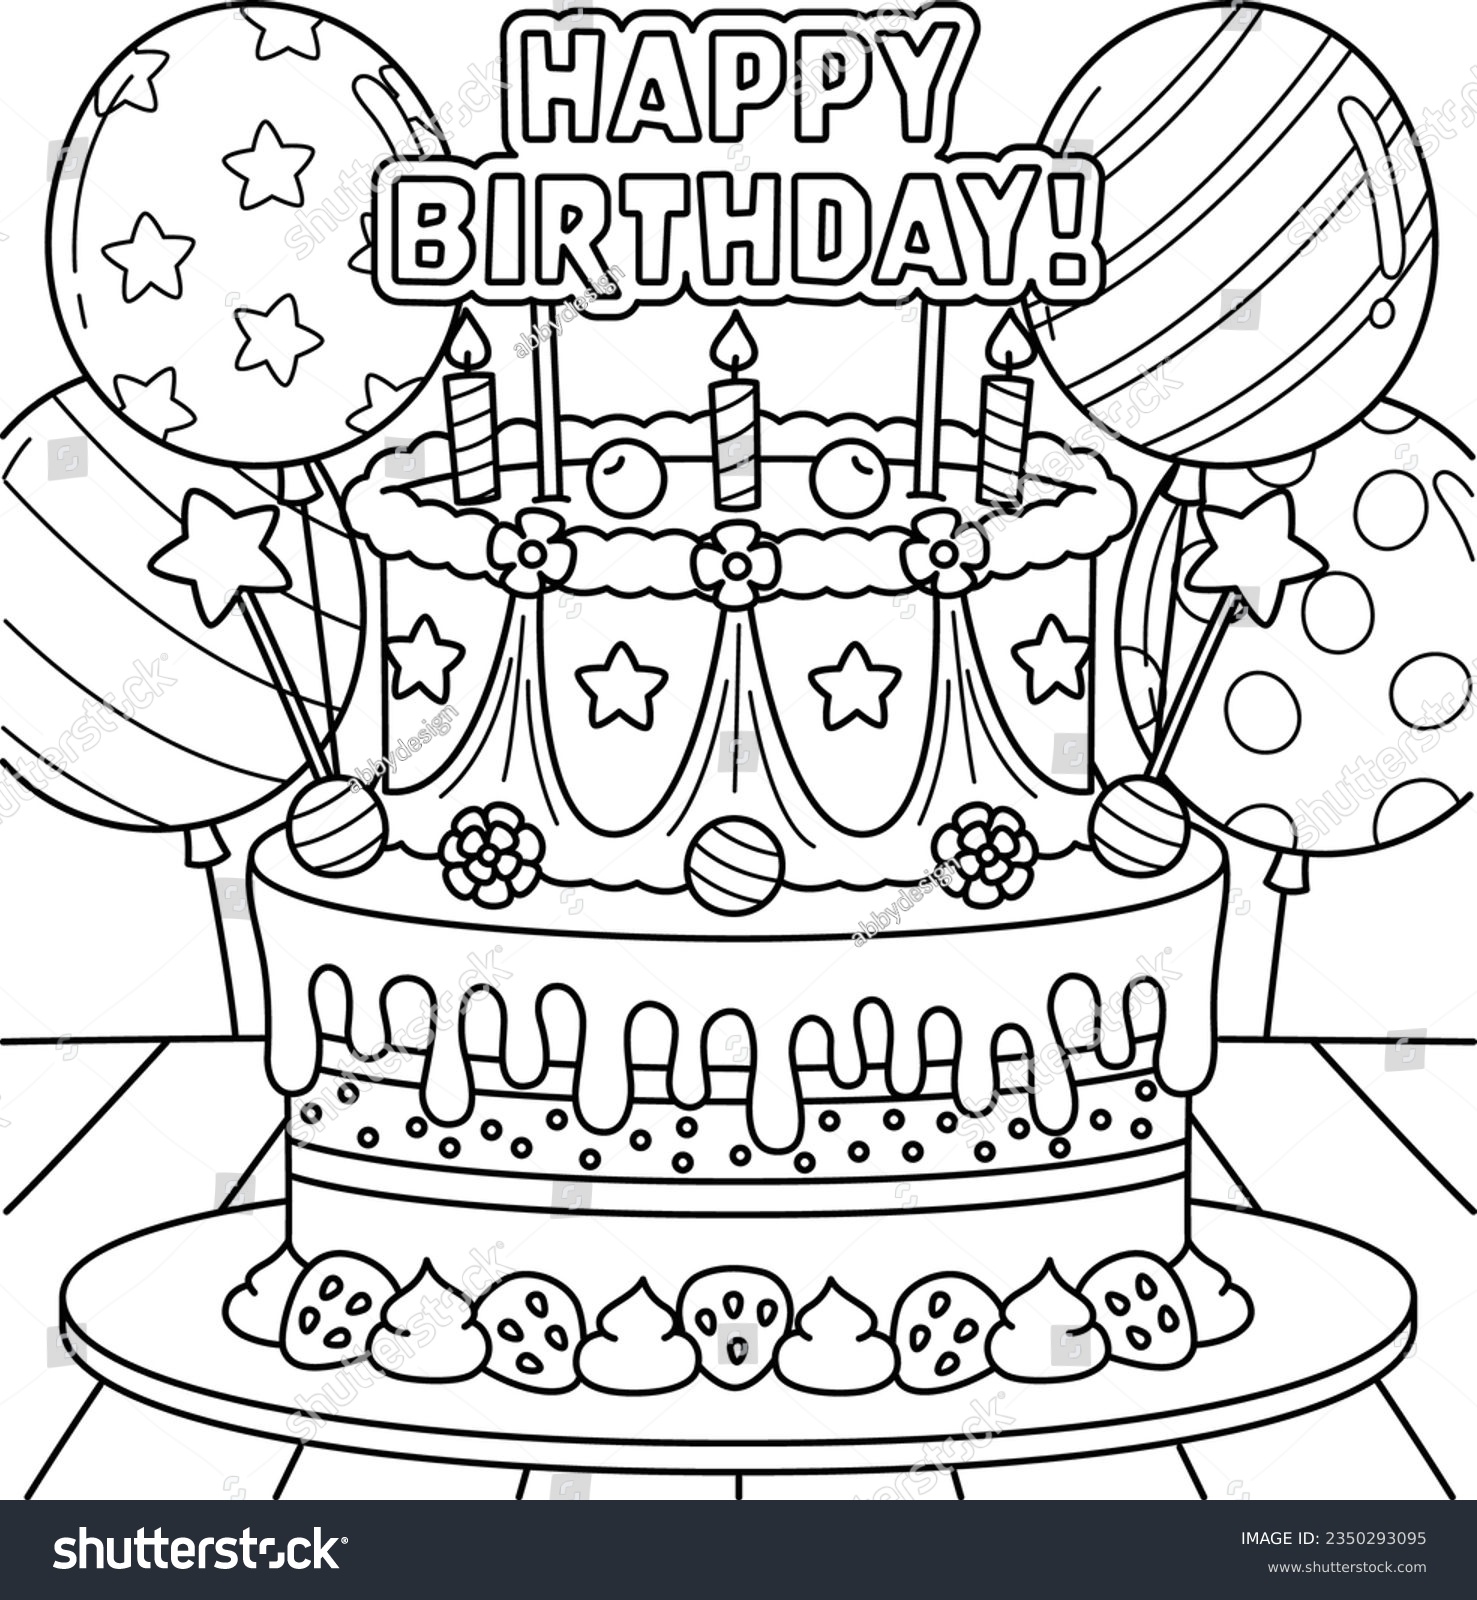 Thousand cake coloring pages royalty